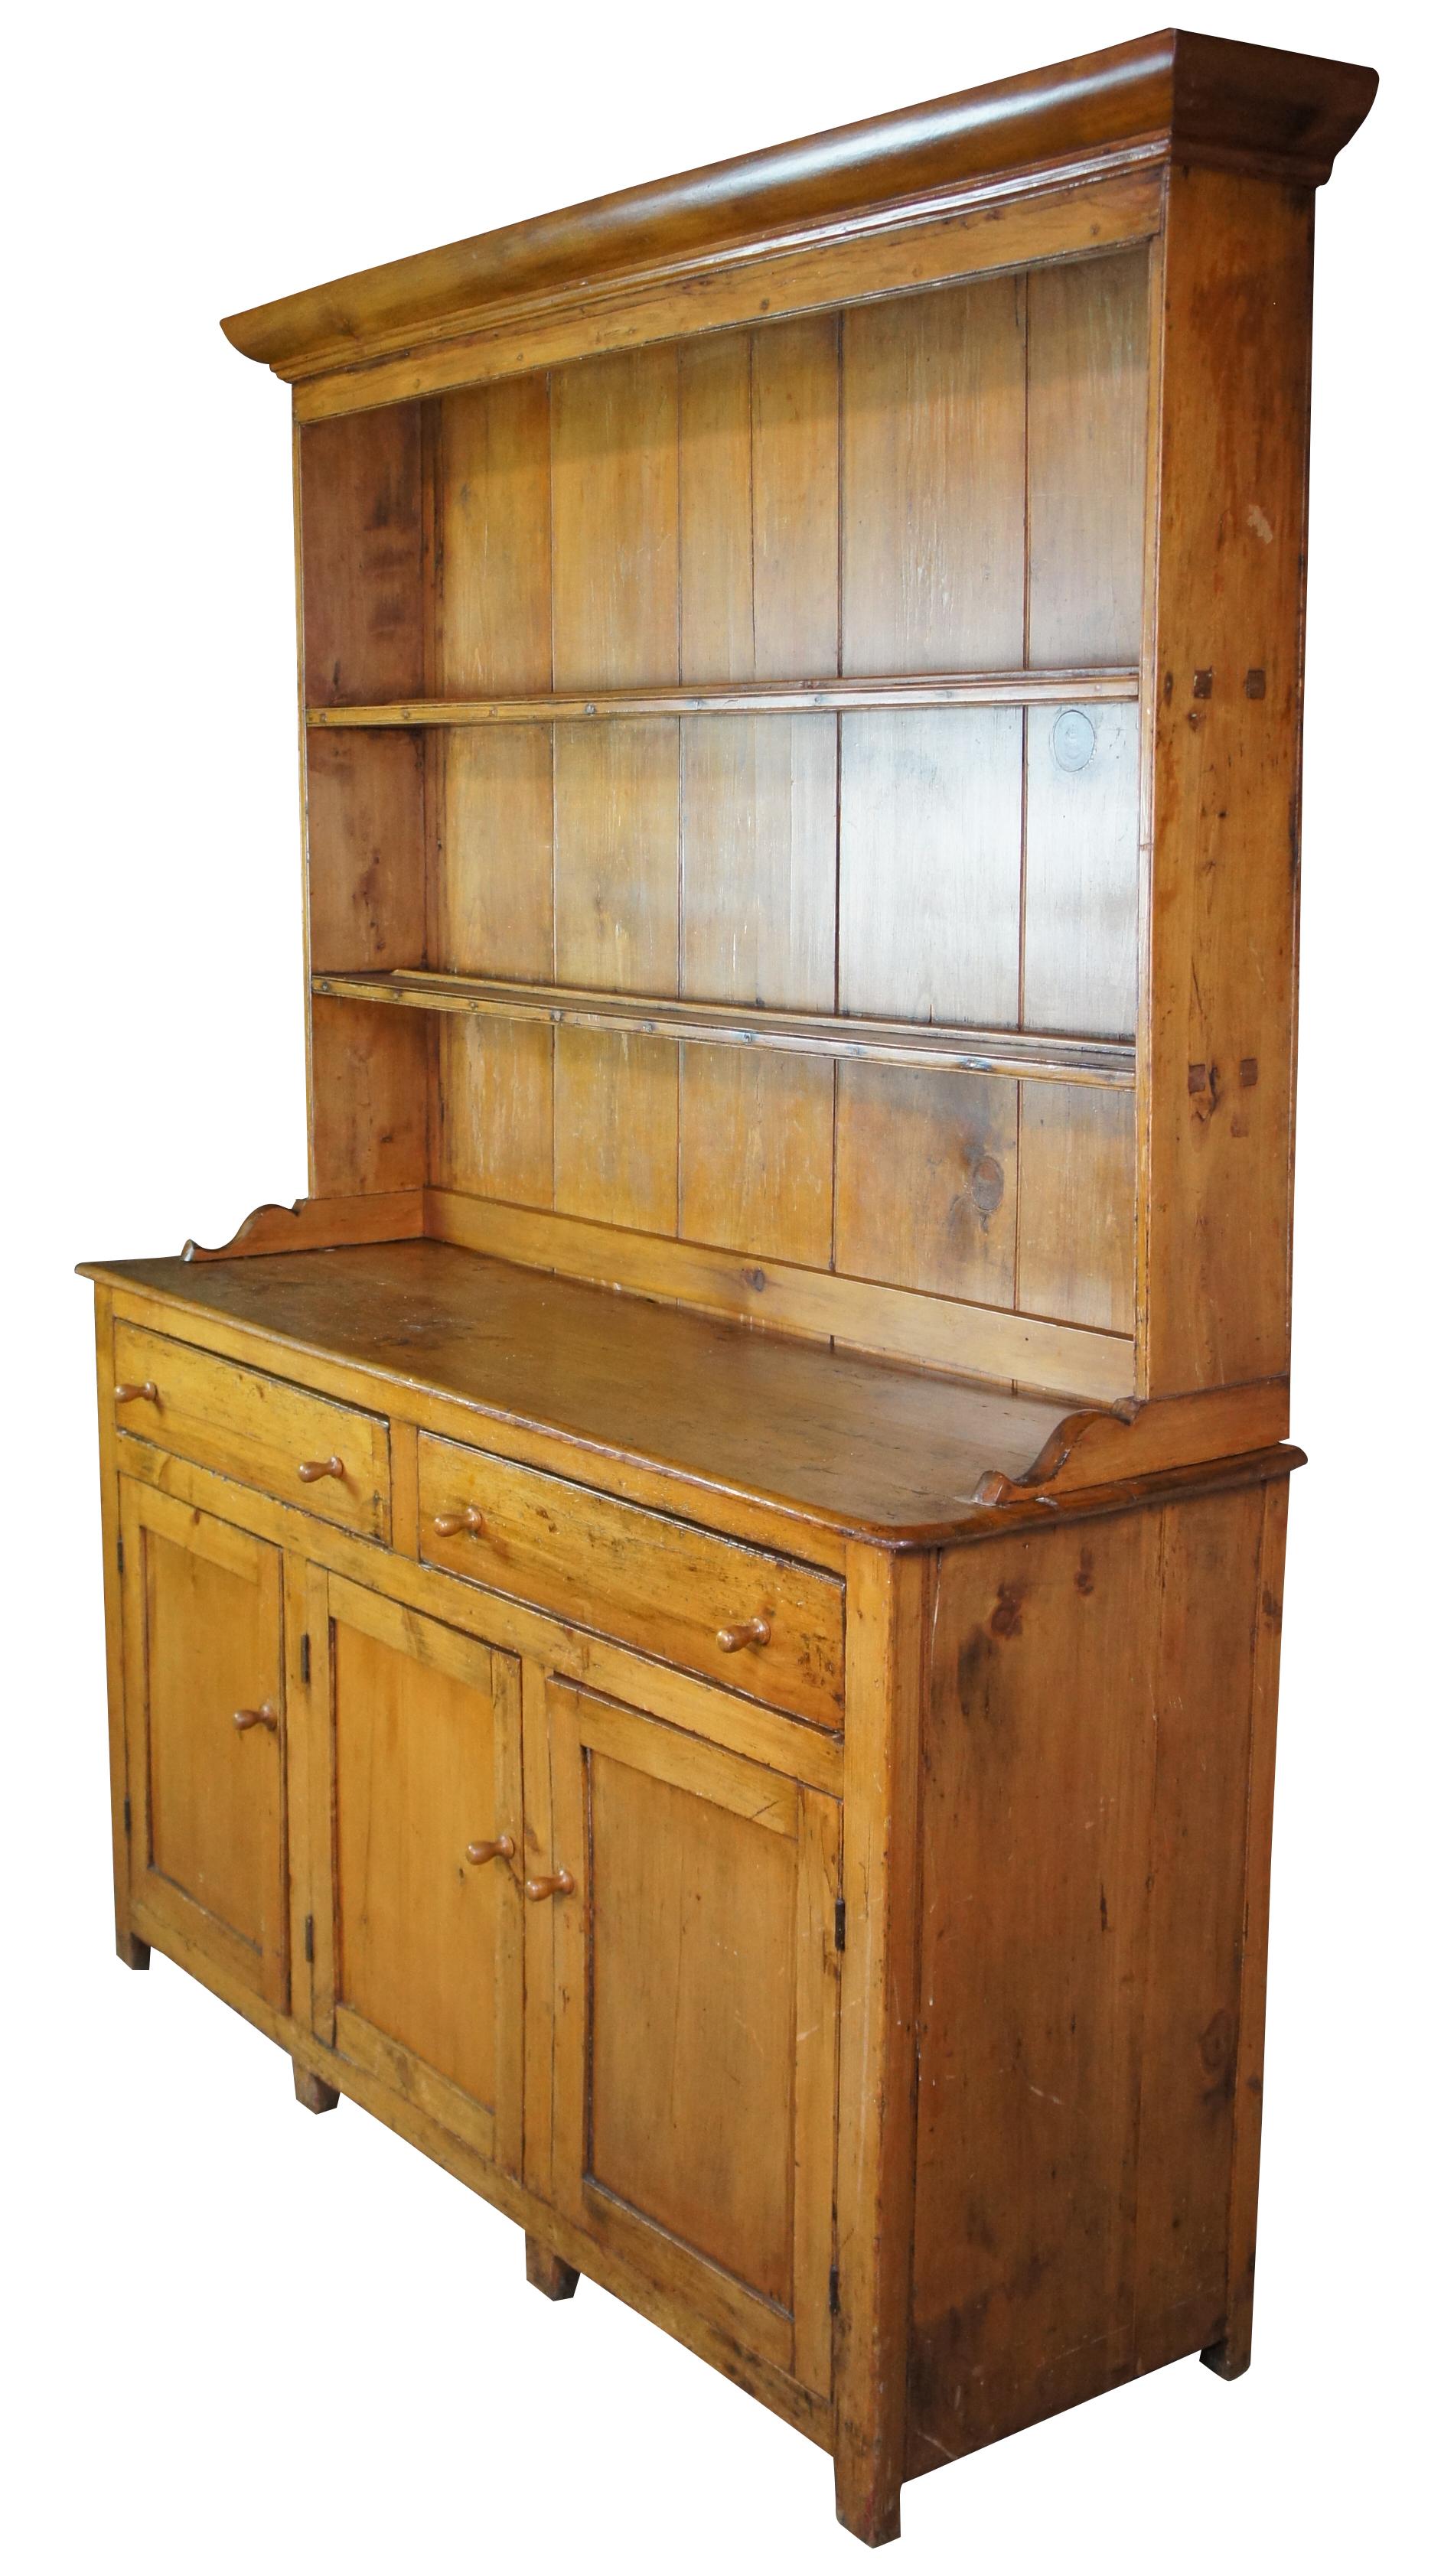 Antique English step back cupboard or china hutch featuring upper shelves with plate grooves and lower cabinet with drawers. Circa 1870s

Surface Height - 34